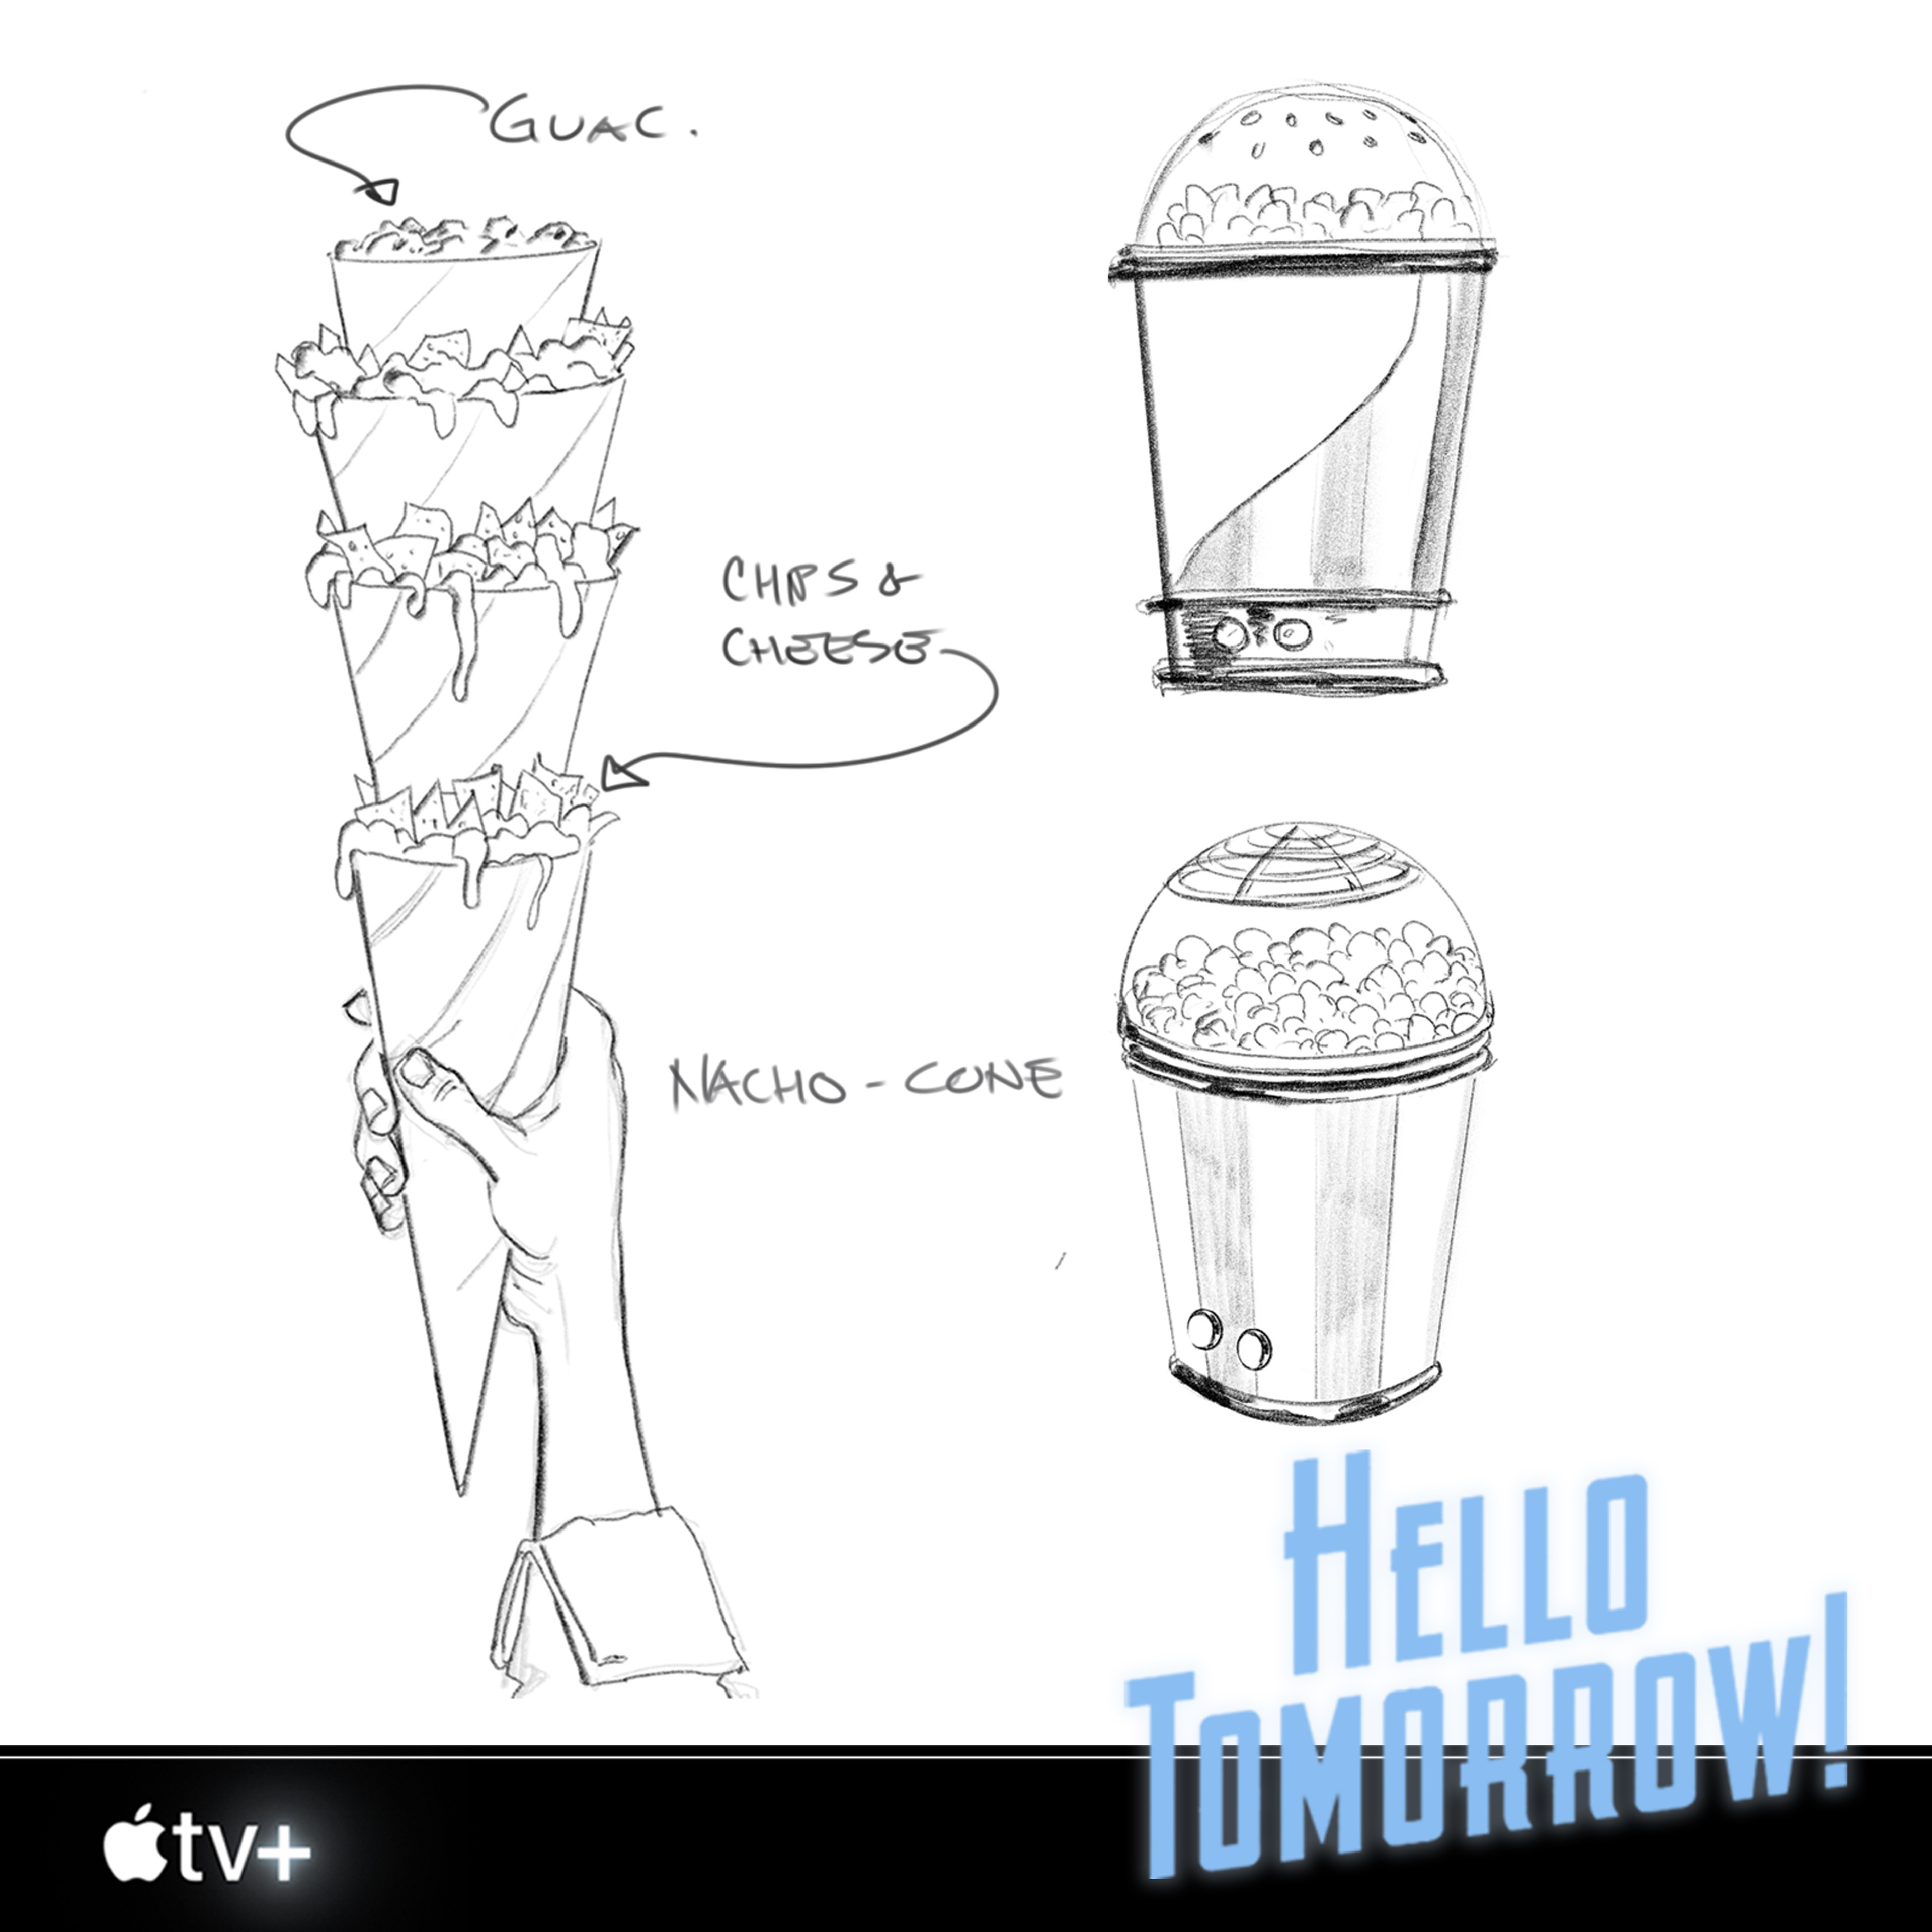 A few quick fun ones - the Nacho Cone and self-popping popcorn - made for Propmaster Eric Cheripka on Apple TV’s Hello Tomorrow! Herb holding that huge cone, all smug, always makes me laugh. 